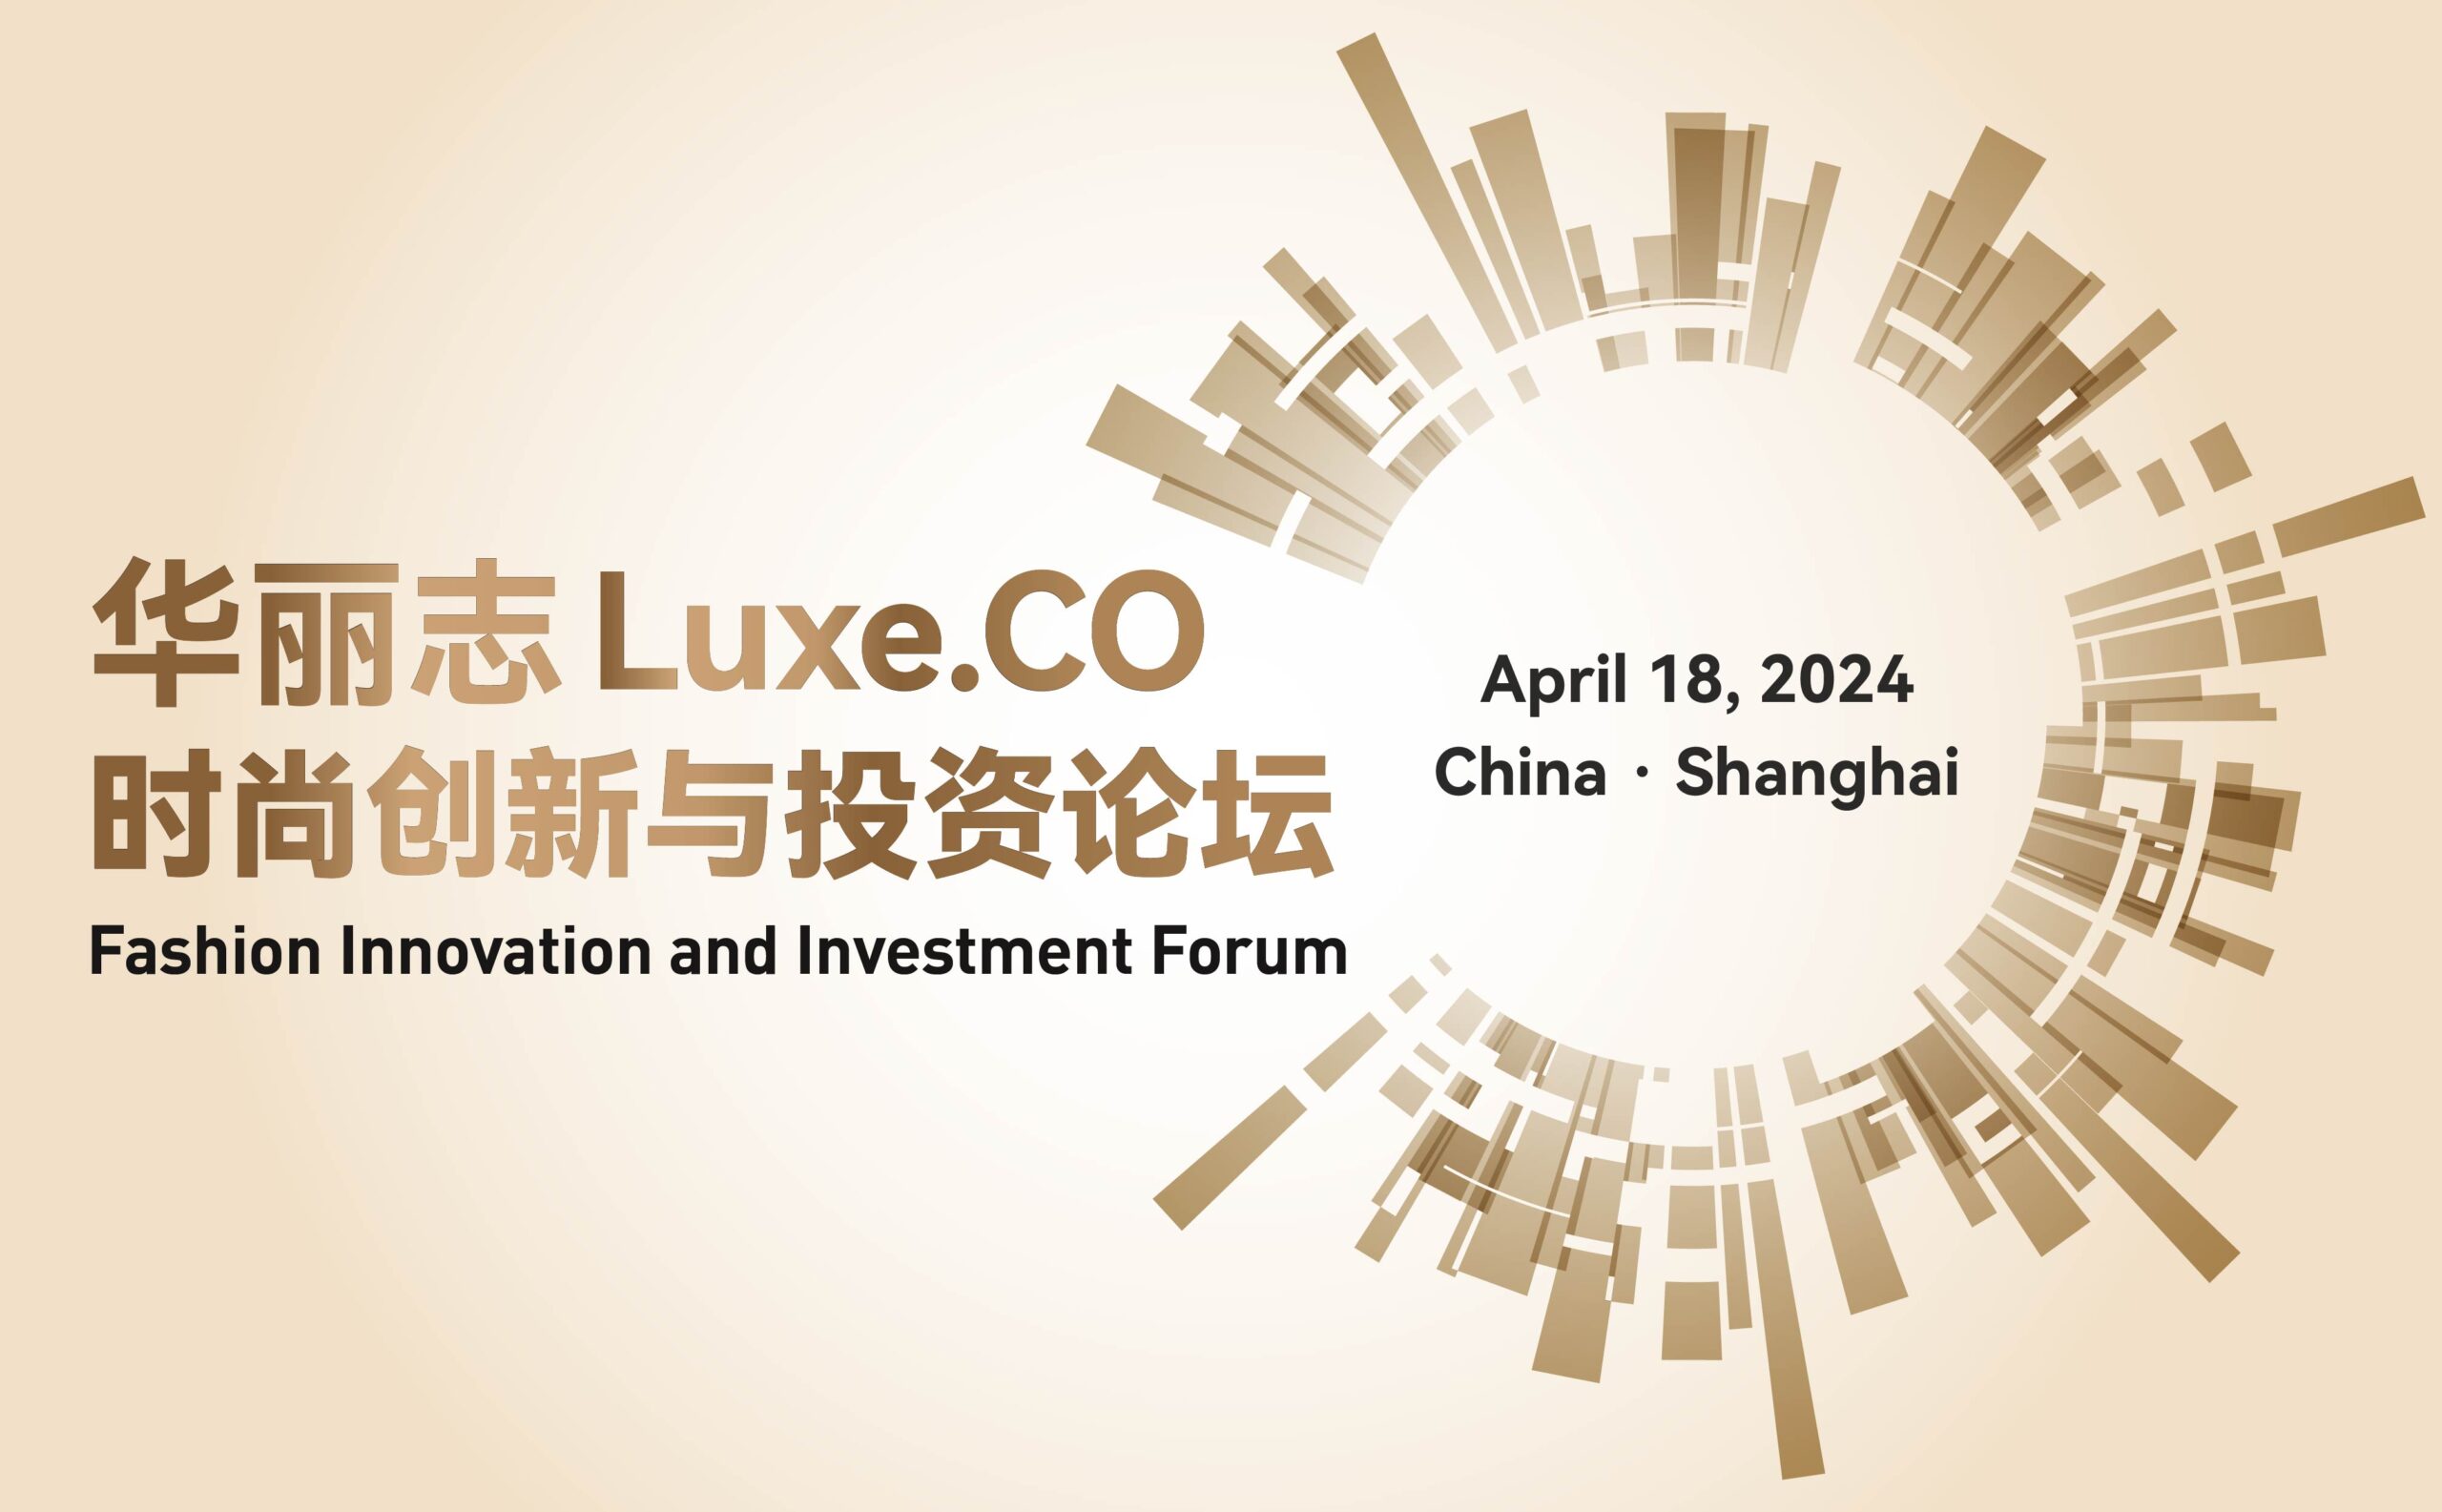 Luxe.CO Fashion Innovation and Investment Forum Relaunches in Shanghai on April 18th